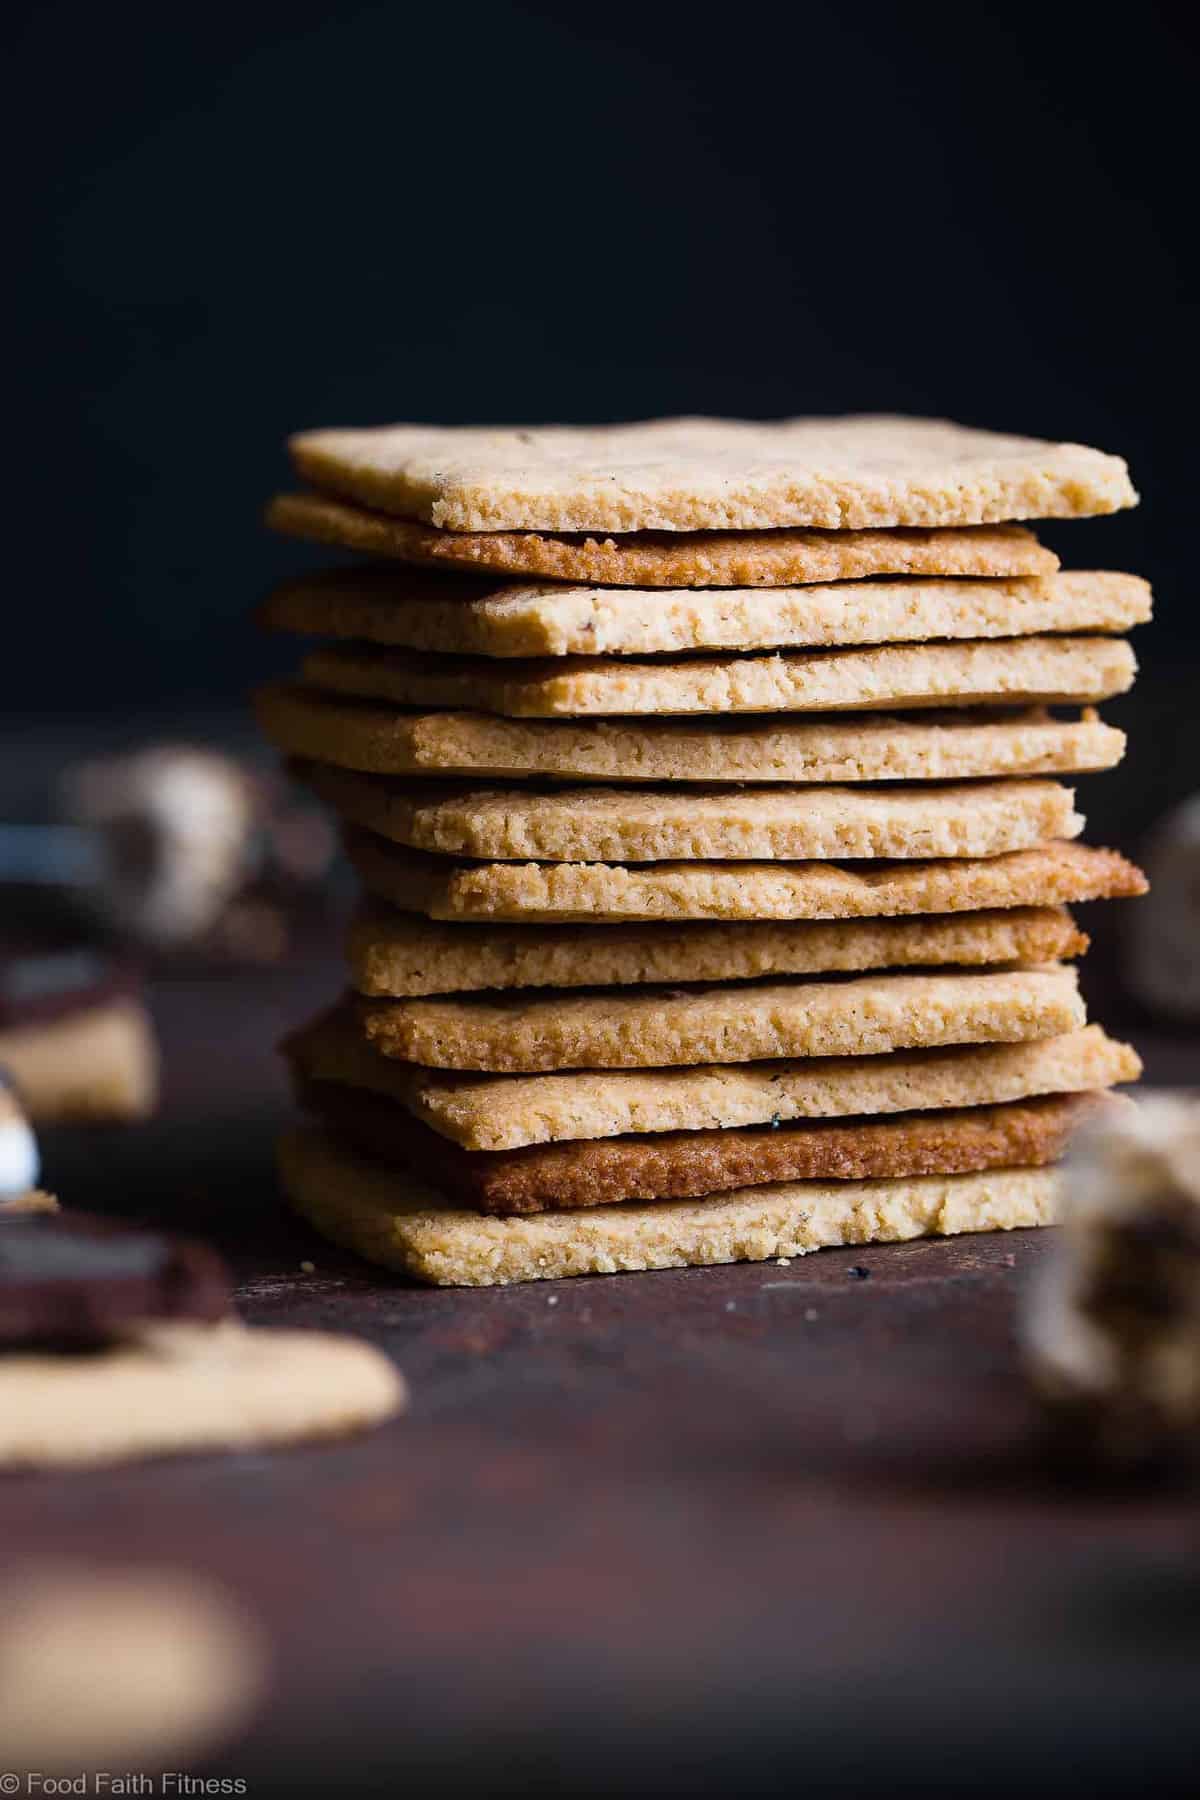 Low Carb Gluten Free Graham Crackers - These healthy, homemade keto graham crackers are SO much better than store bought that you'll never believe they are paleo friendly, sugar free and only 6 simple ingredients! | #Foodfaithfitness | #Keto #LowCarb #Glutenfree #paleo #Healthy